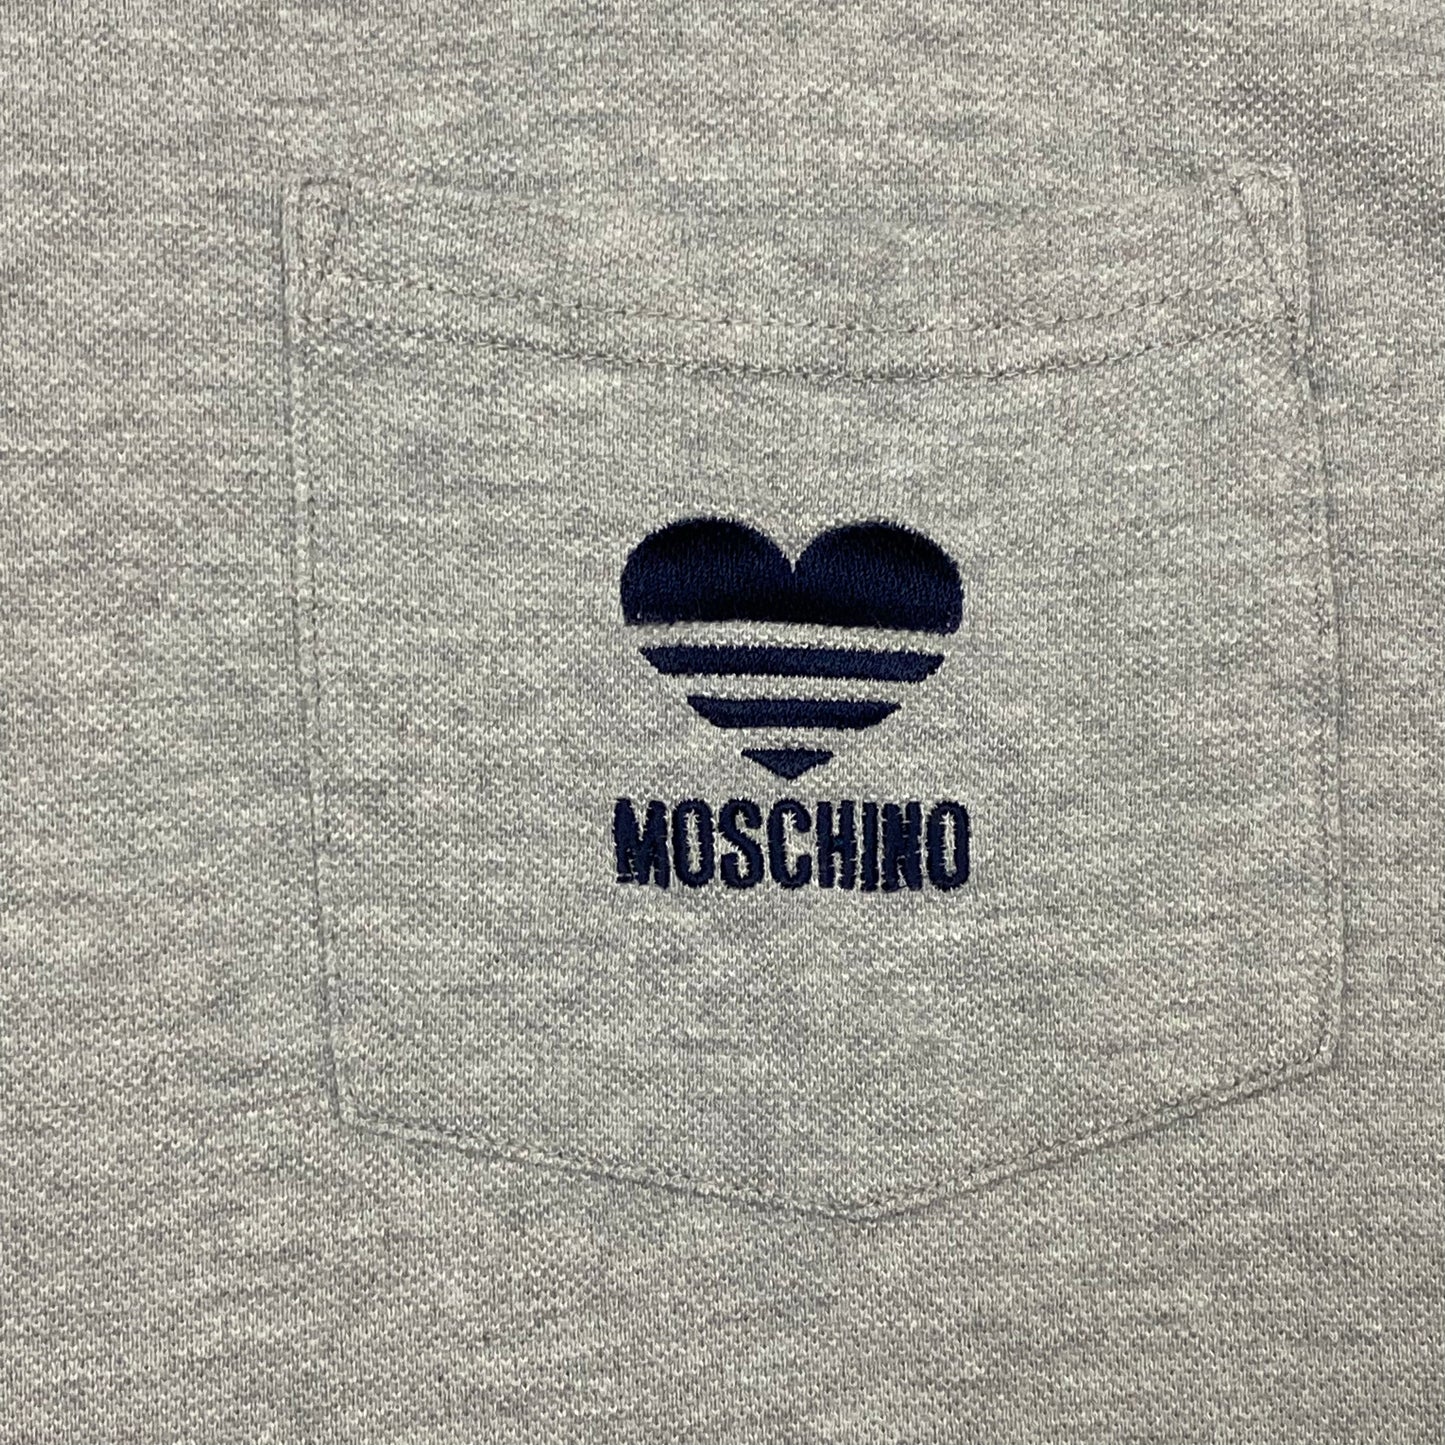 Moschino Jeans 90’s Taped Monogram Polo - XL